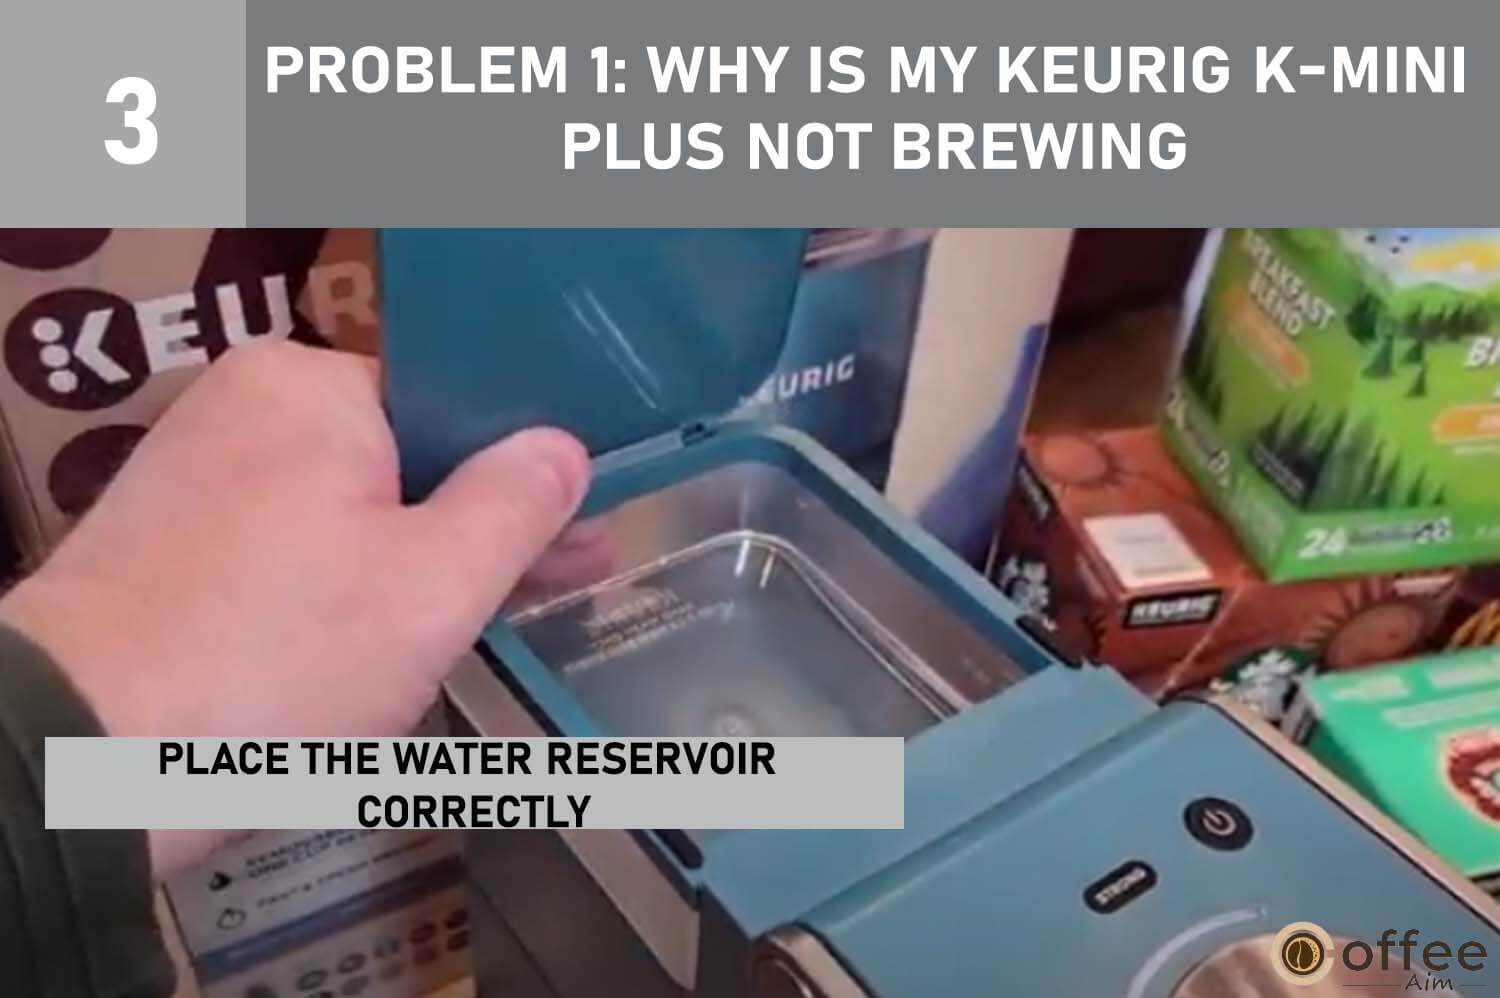 This image demonstrates the correct placement of the Water Reservoir for Problem 1: "Why Is My Keurig K-Mini Plus Not Brewing?" in our article "Keurig K-Mini Plus Problems."